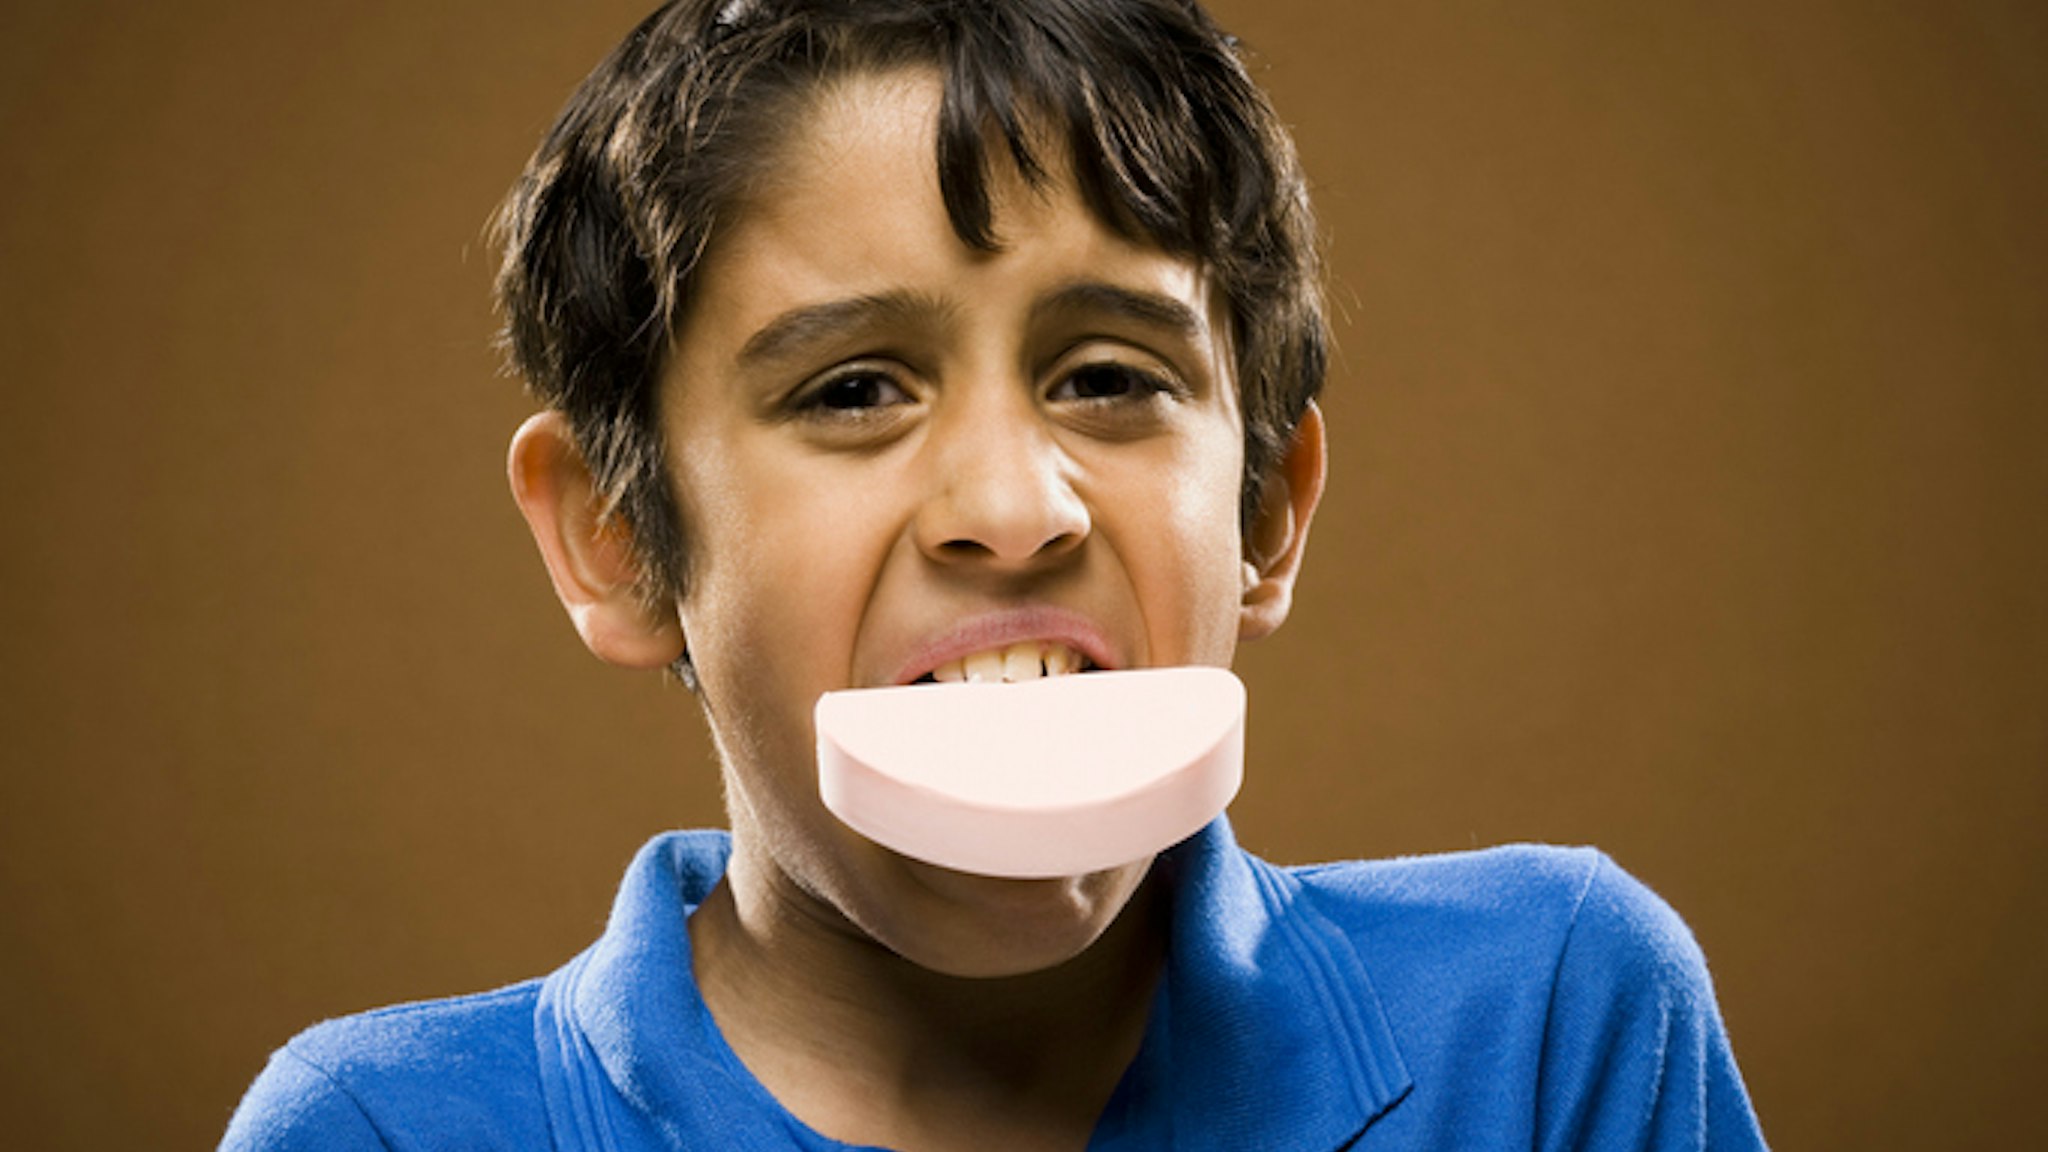 Image of boy with soap in mouth.